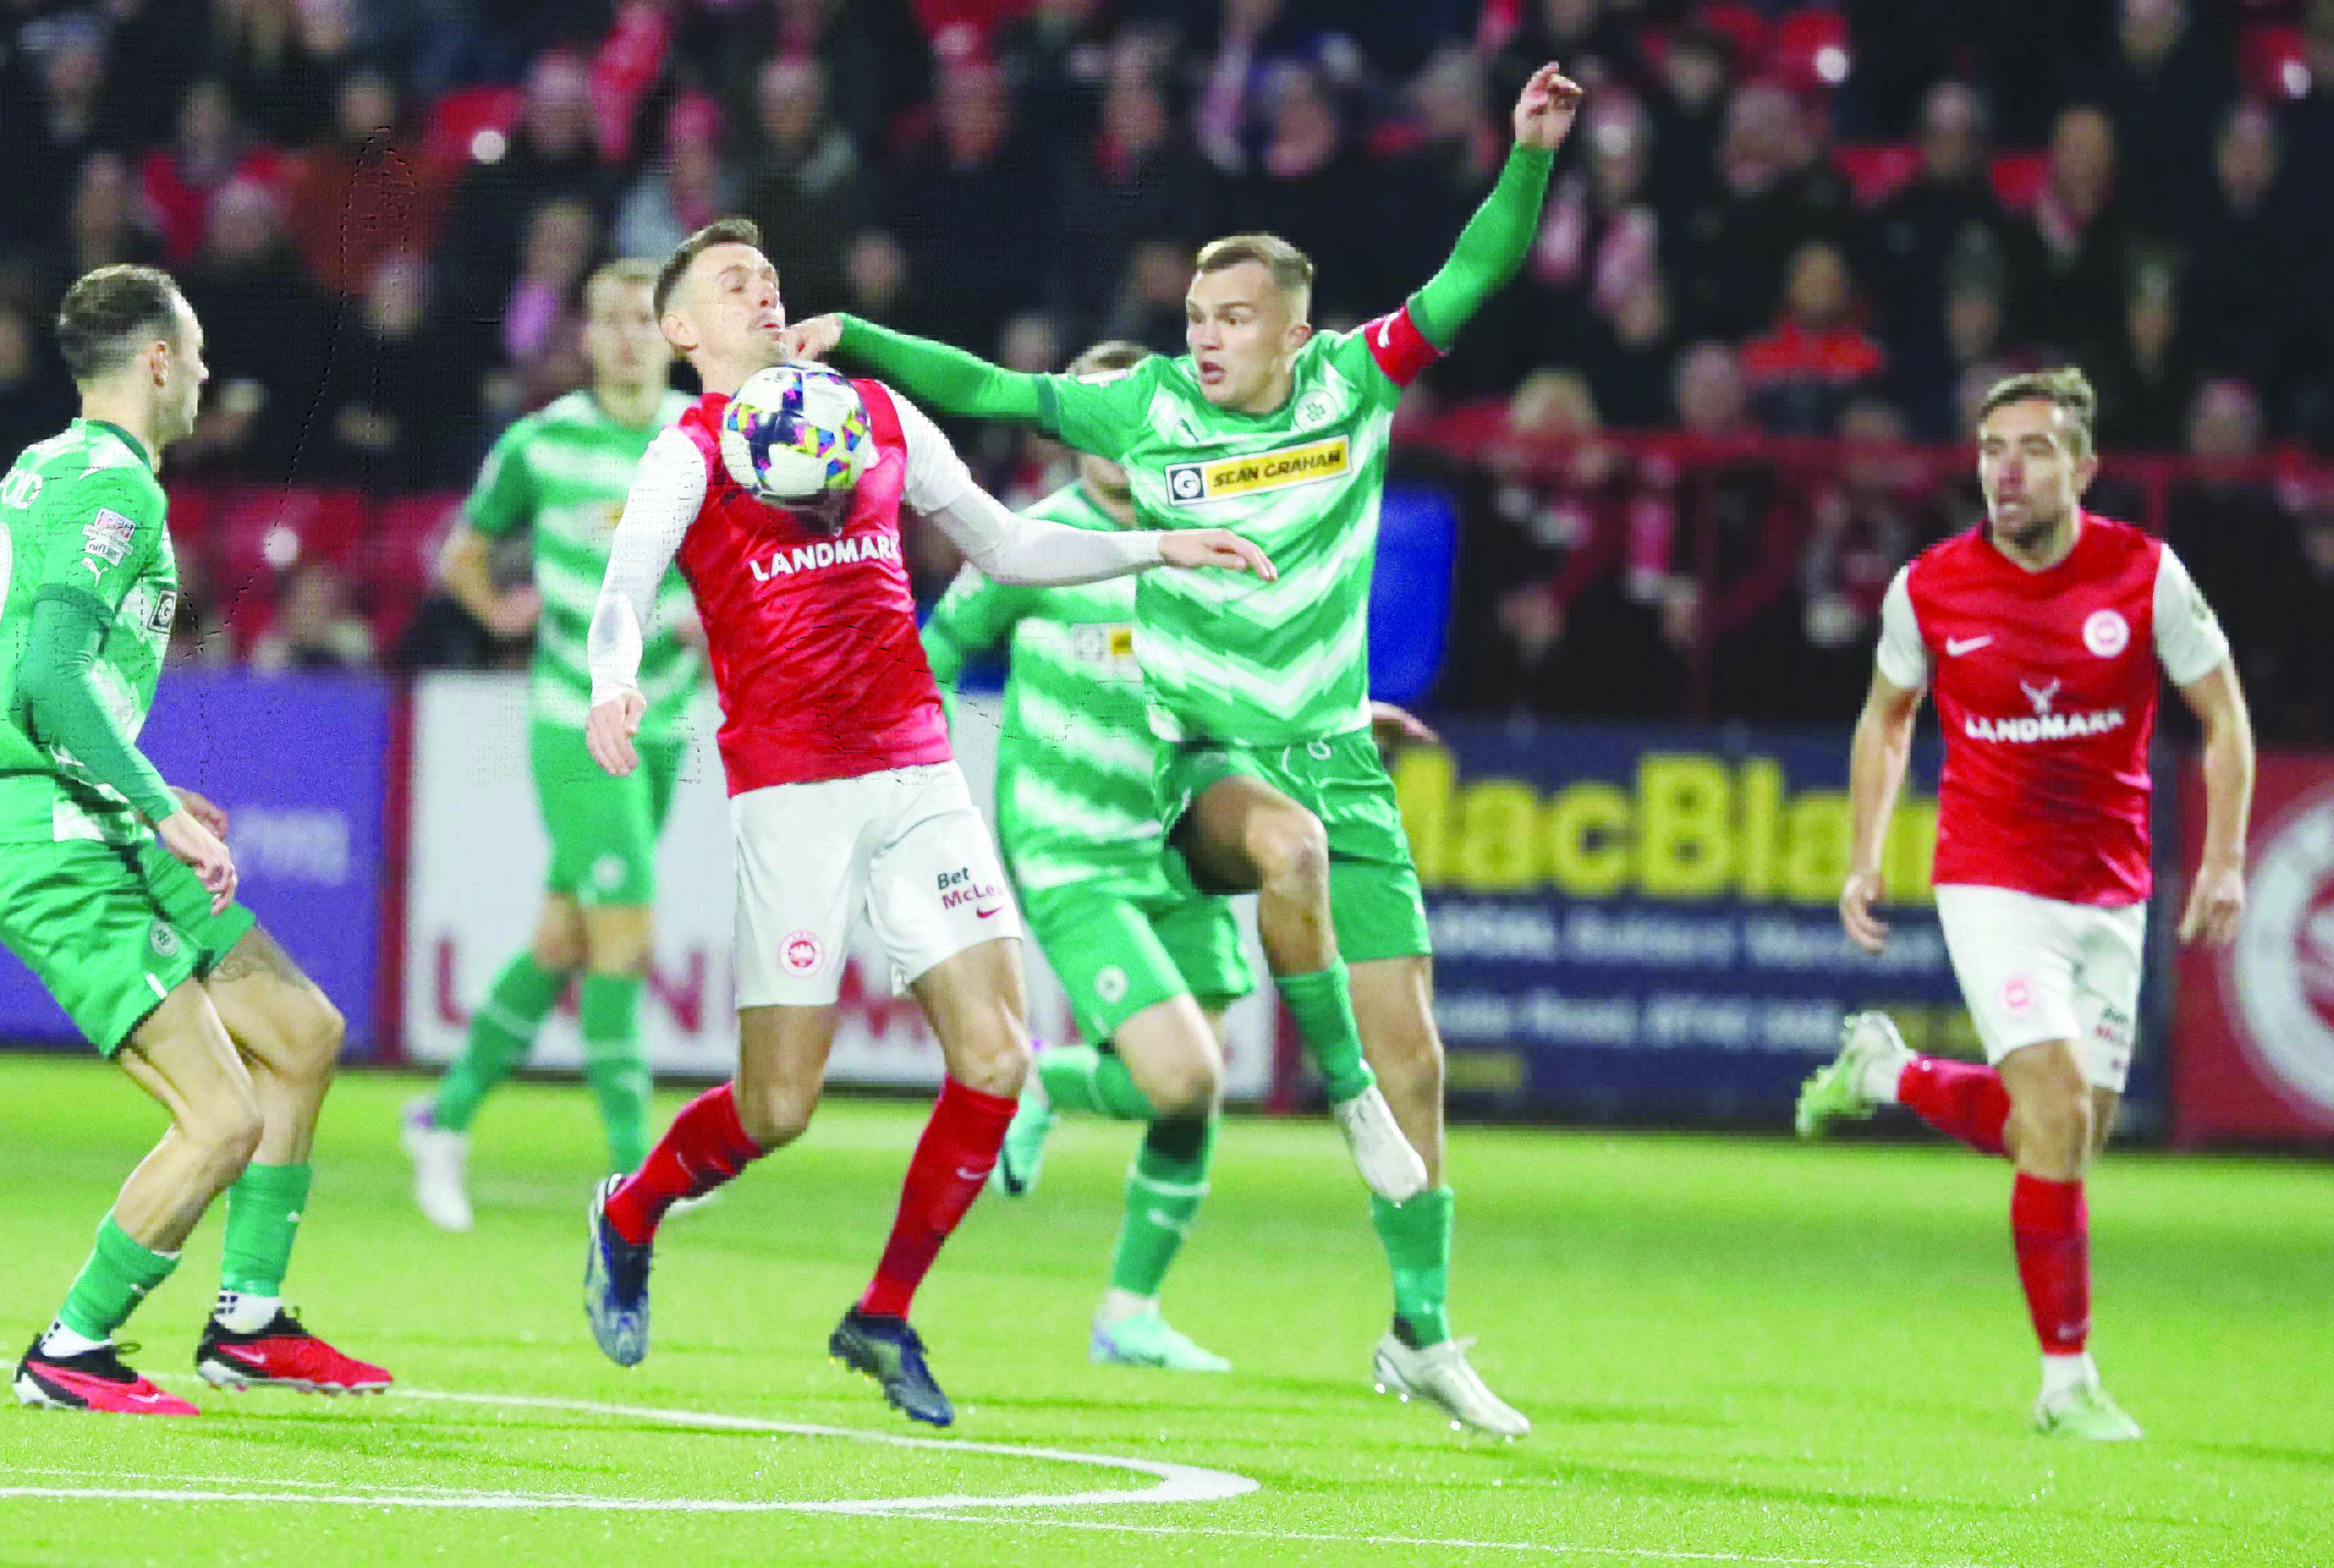 Larne have held the upper hand over Cliftonville in recent times but Saturday’s Irish Cup semi-final is an opportunity for the Belfas Reds to strike back